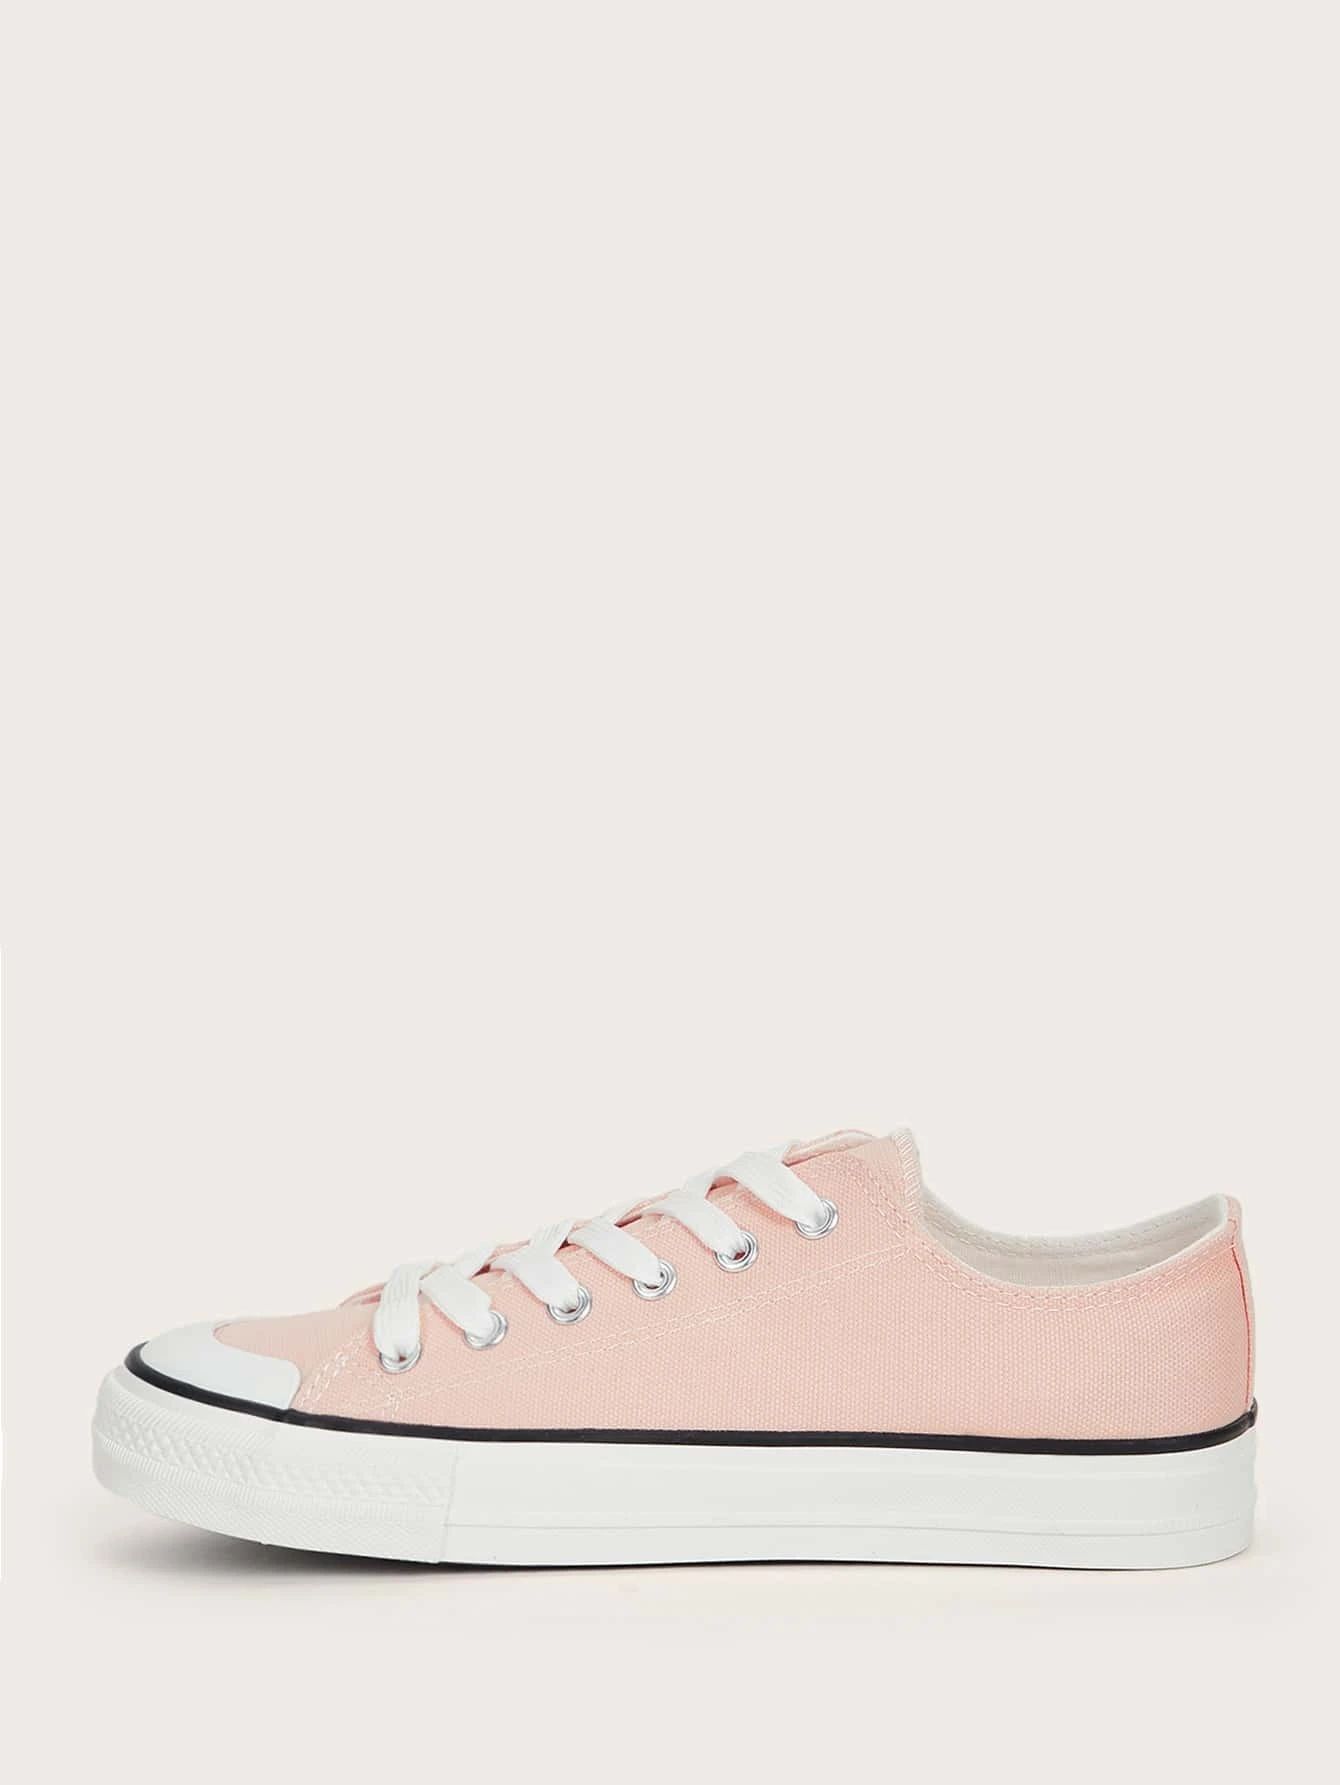 Lace Up Front Canvas Shoes | SHEIN